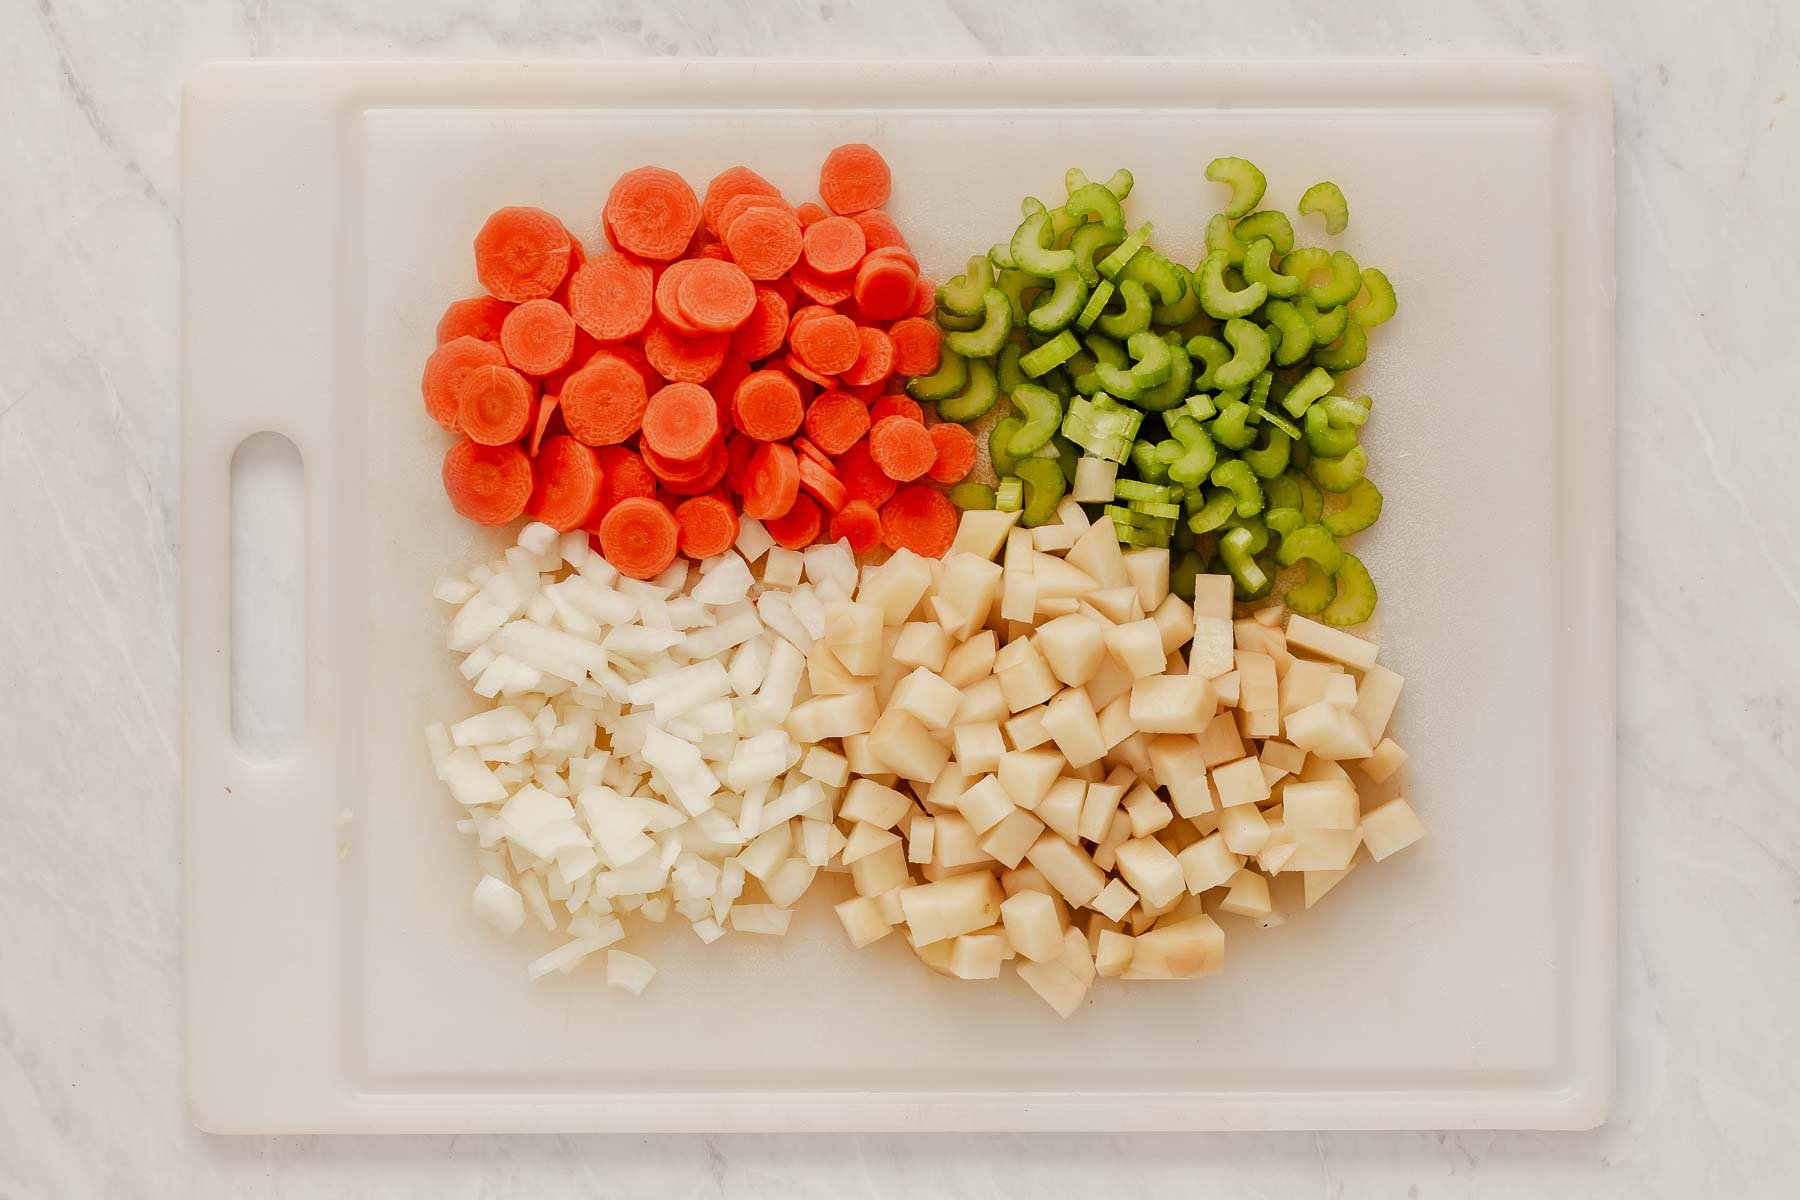 Piles of chopped carrots, celery, onions and potatoes on white cutting board.